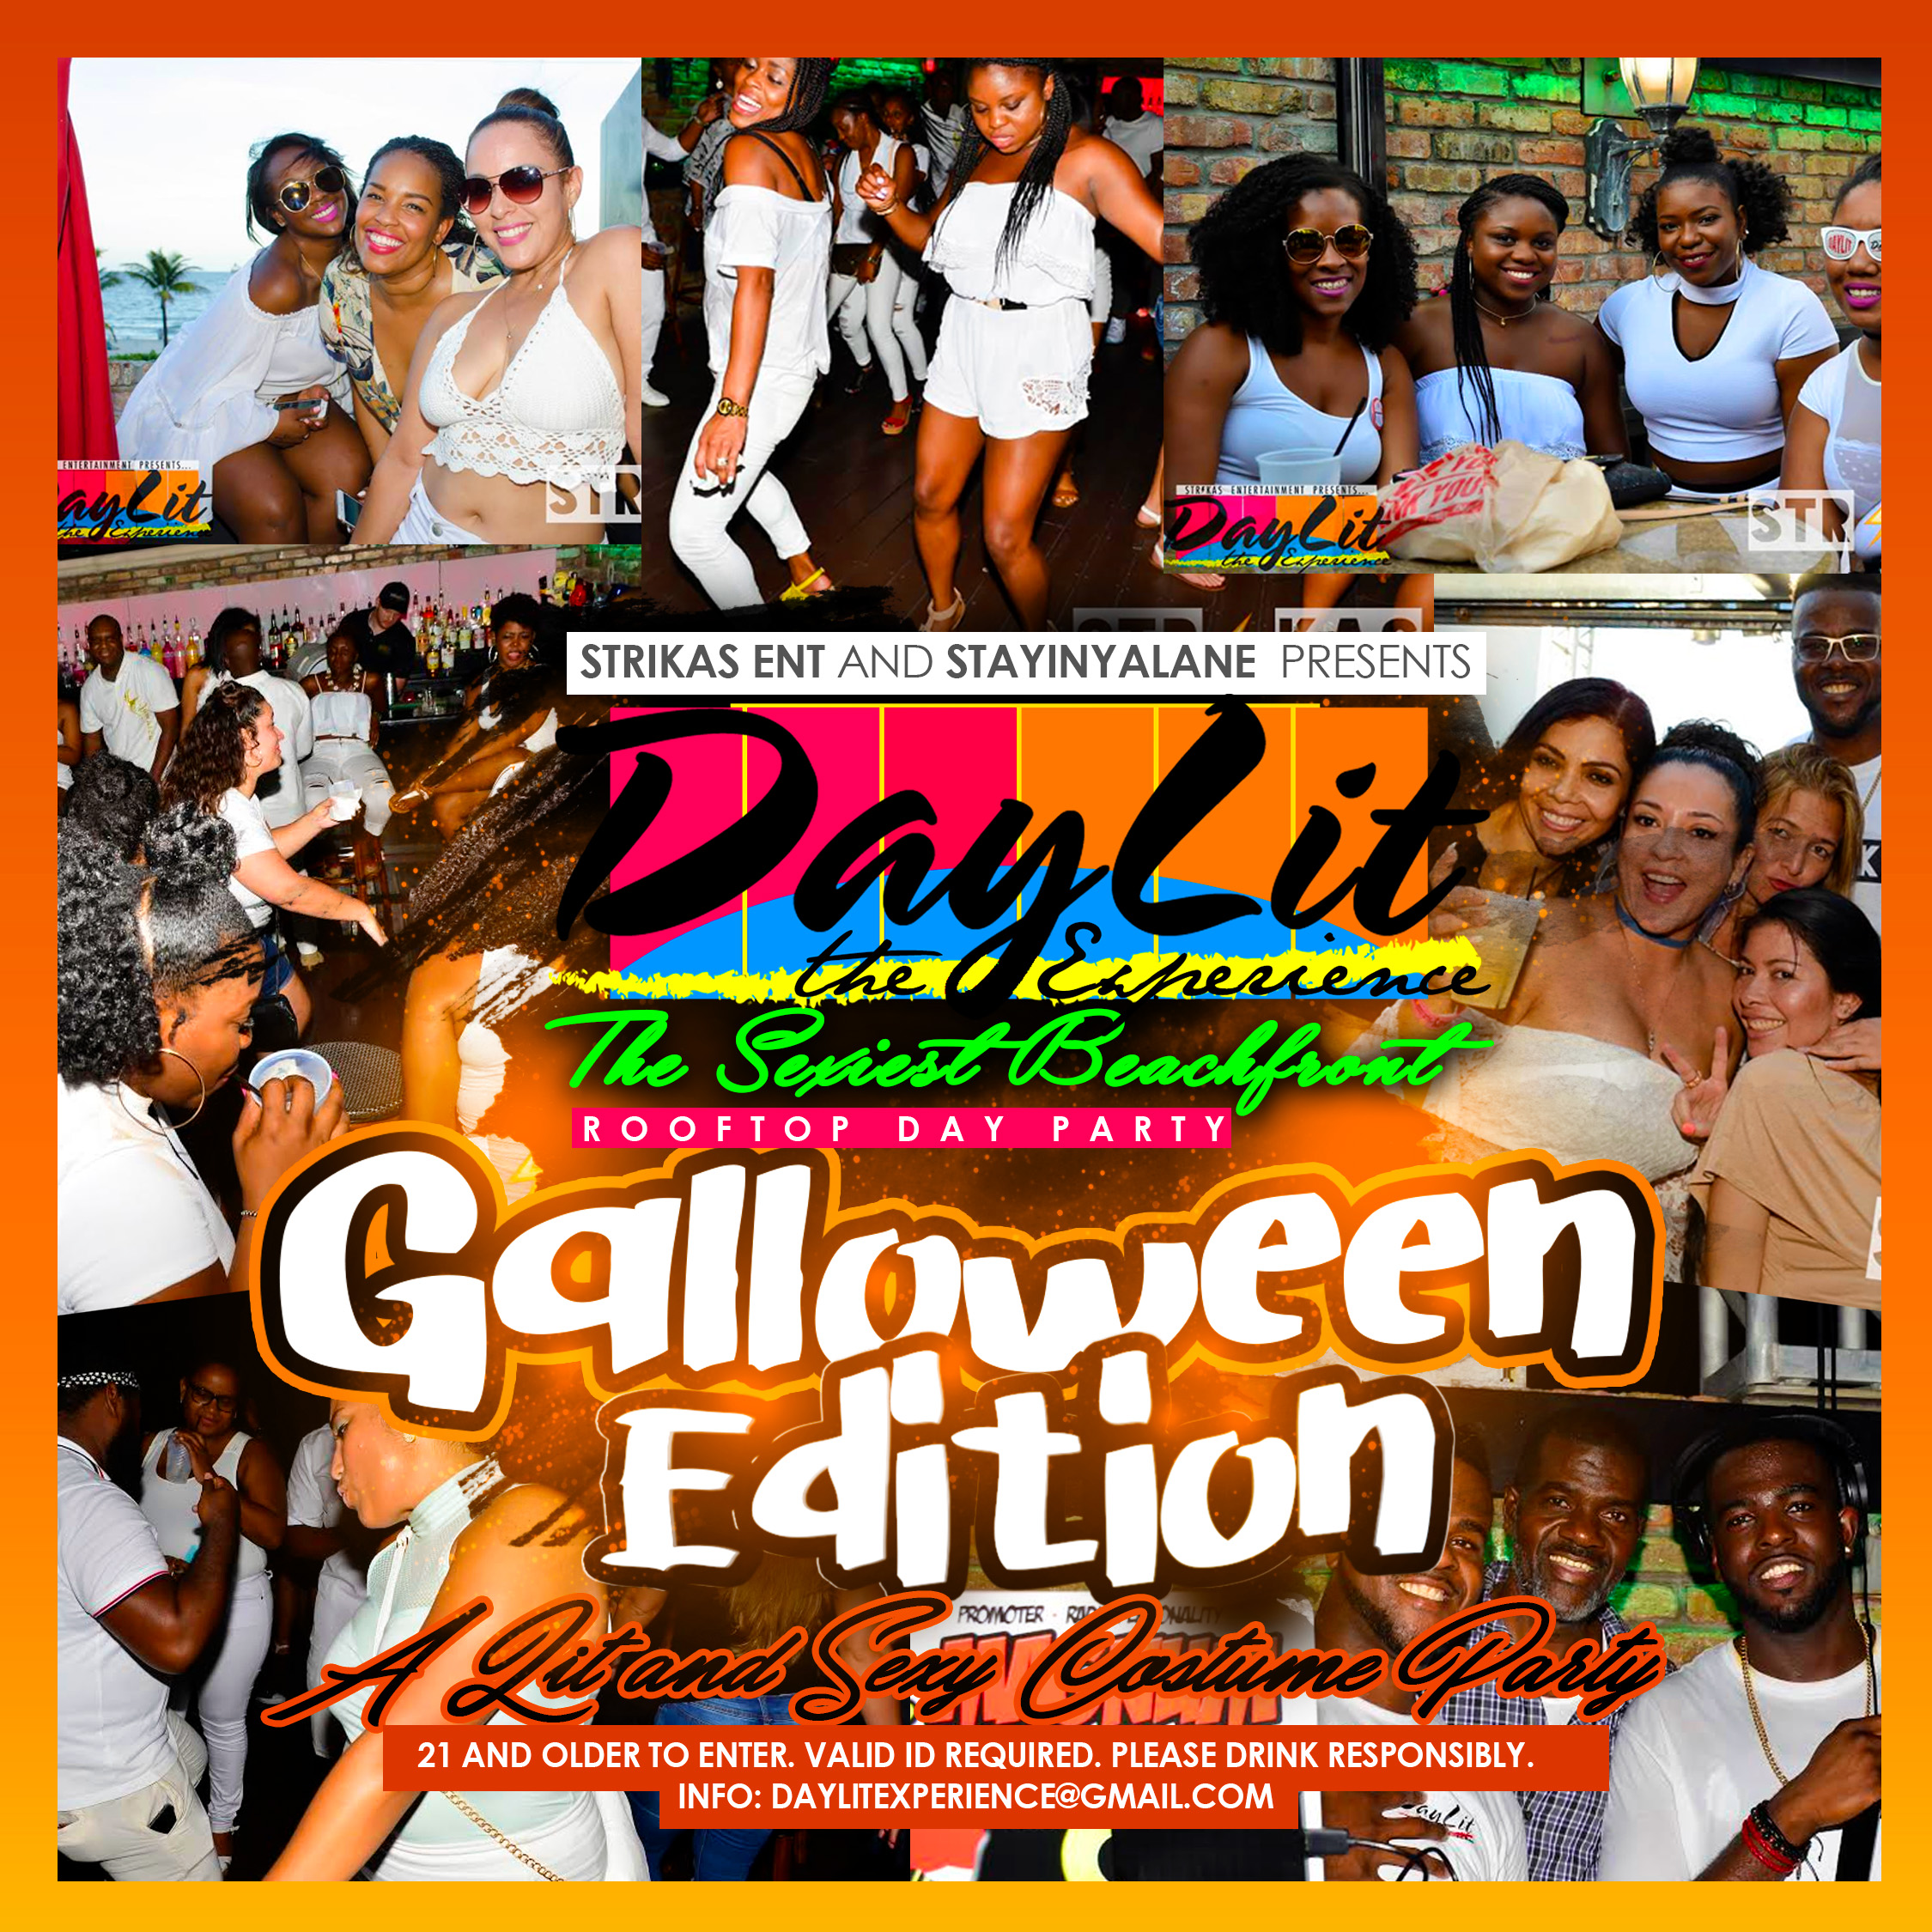 DayLit - Galloween Edition back featuring your girl's favourite DJ, Mr. Magnum